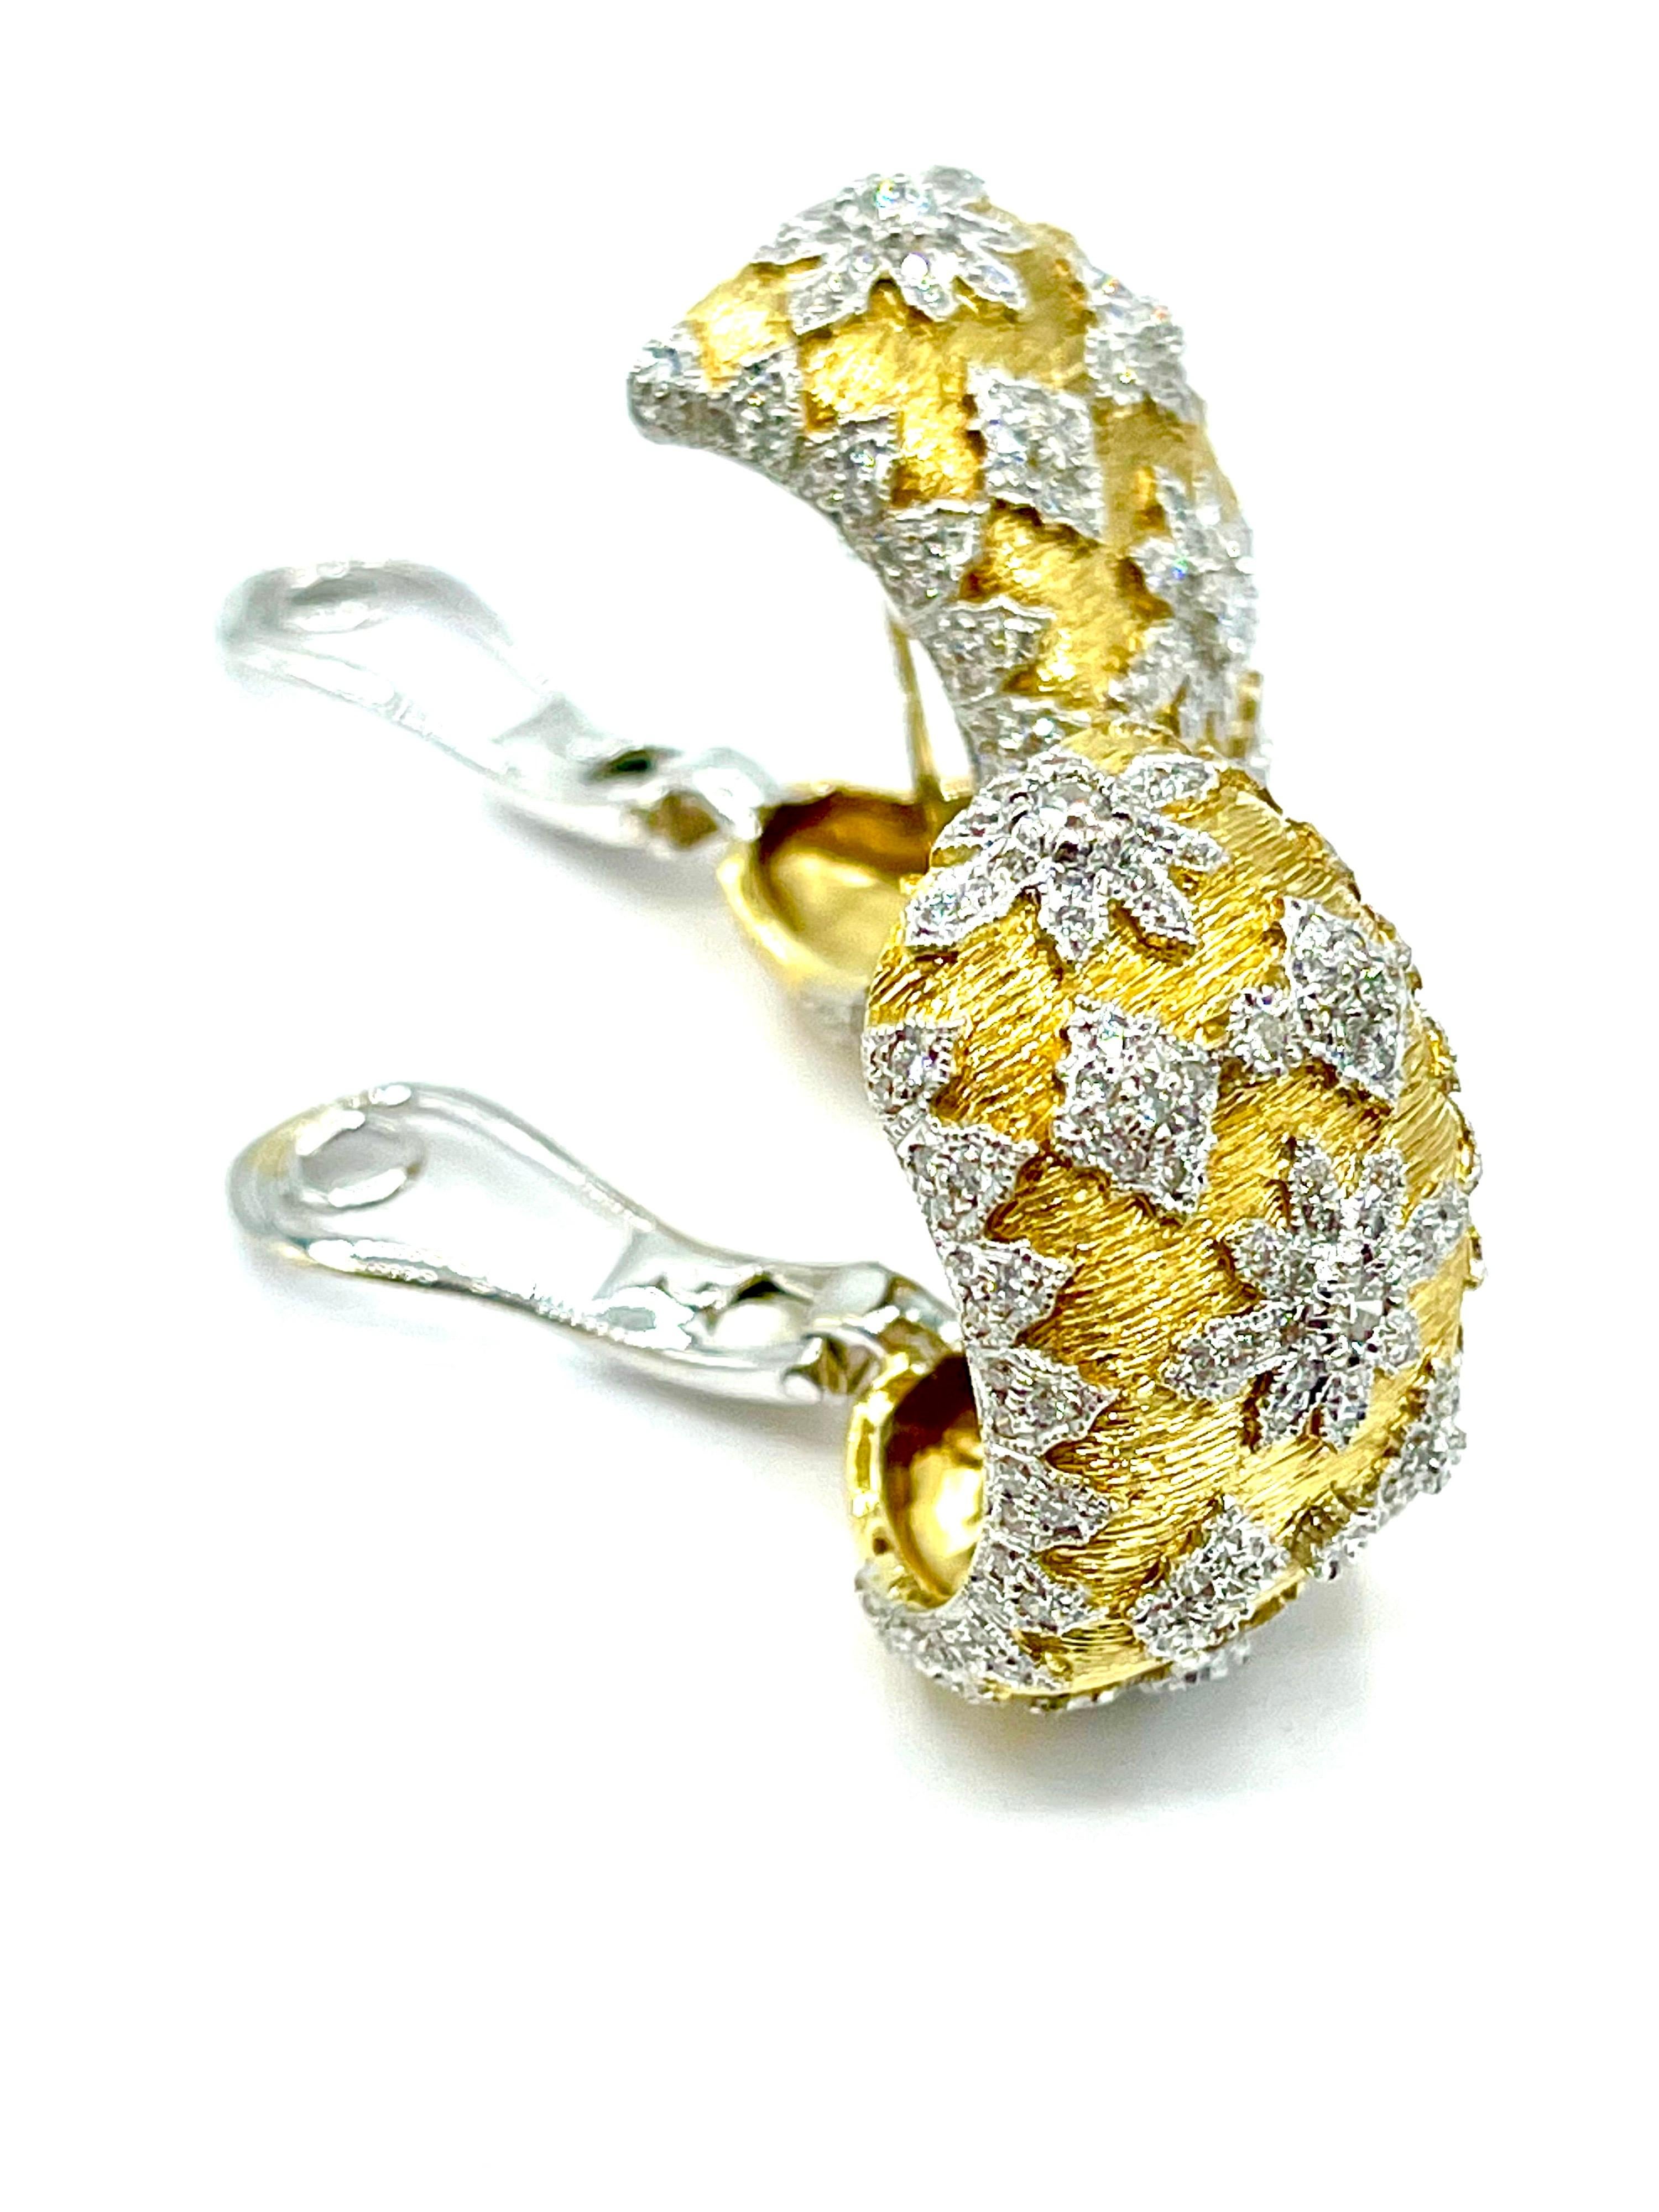 Round Cut 1.71 Carat Diamond and 18 Karat White and Yellow Gold Clip and Post Earrings